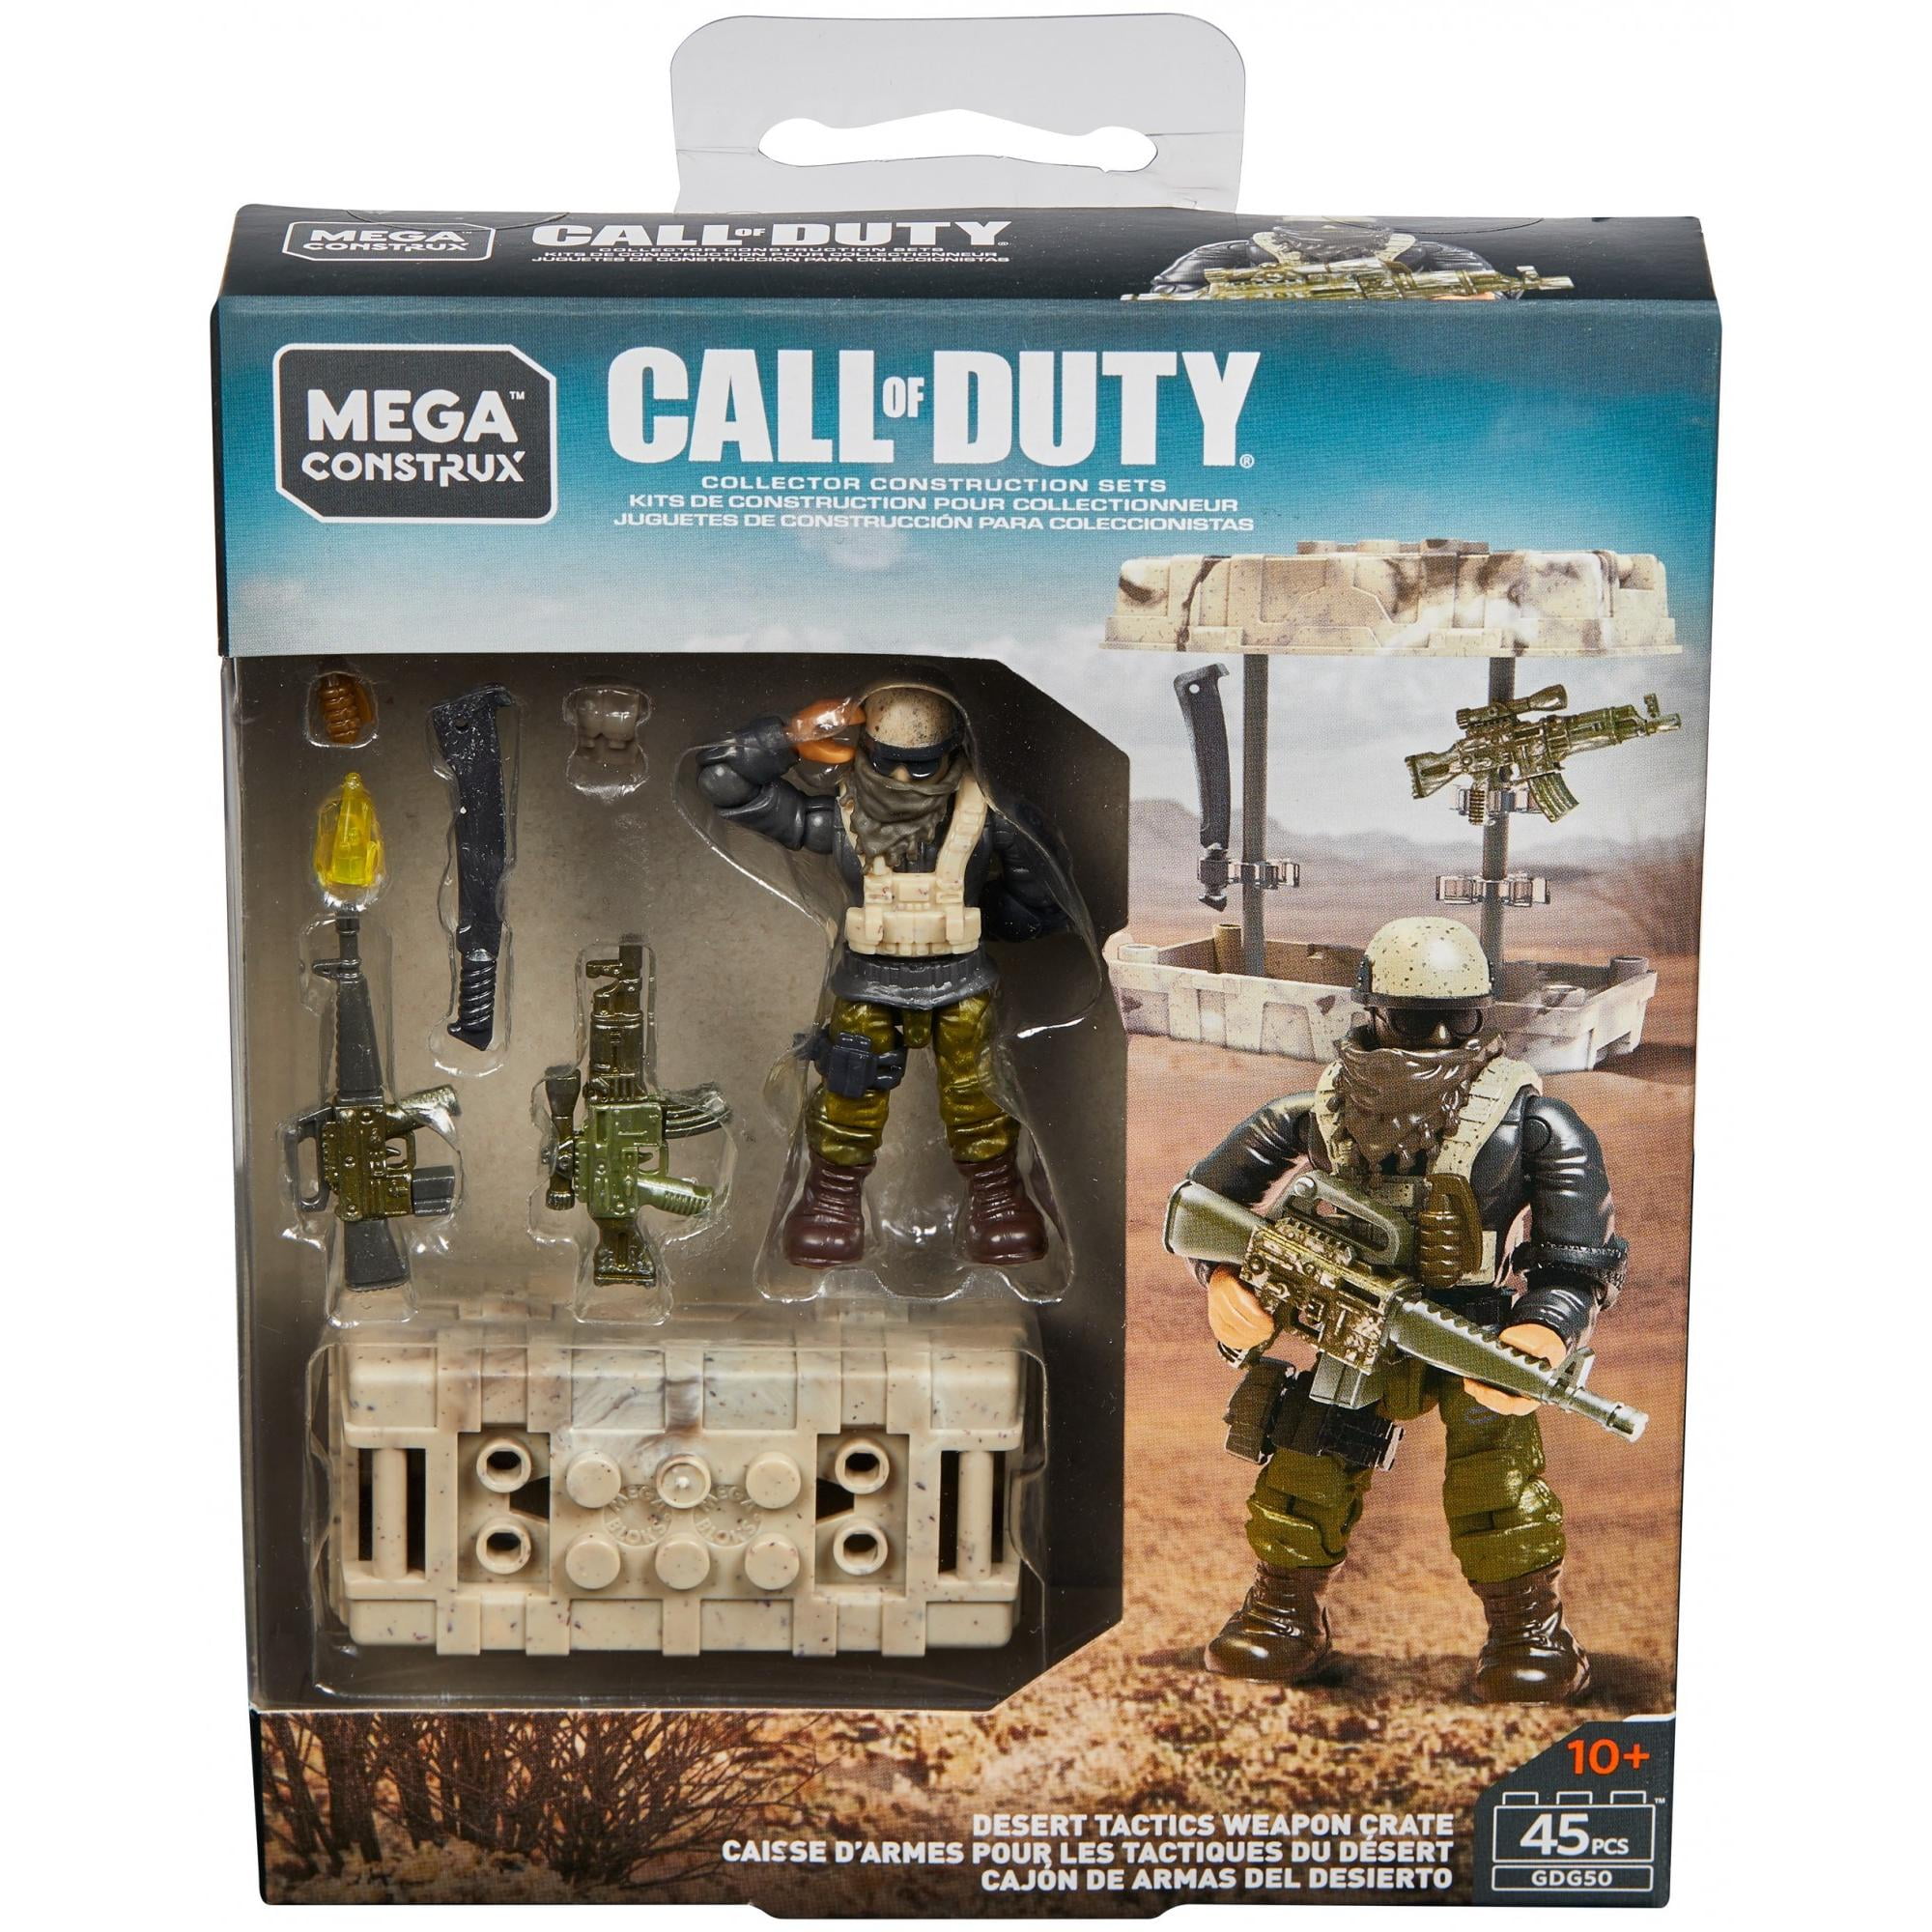 SEALED! Mega Construx Call Of Duty DESERT TACTICS Weapon Crate GDG50 NEW 